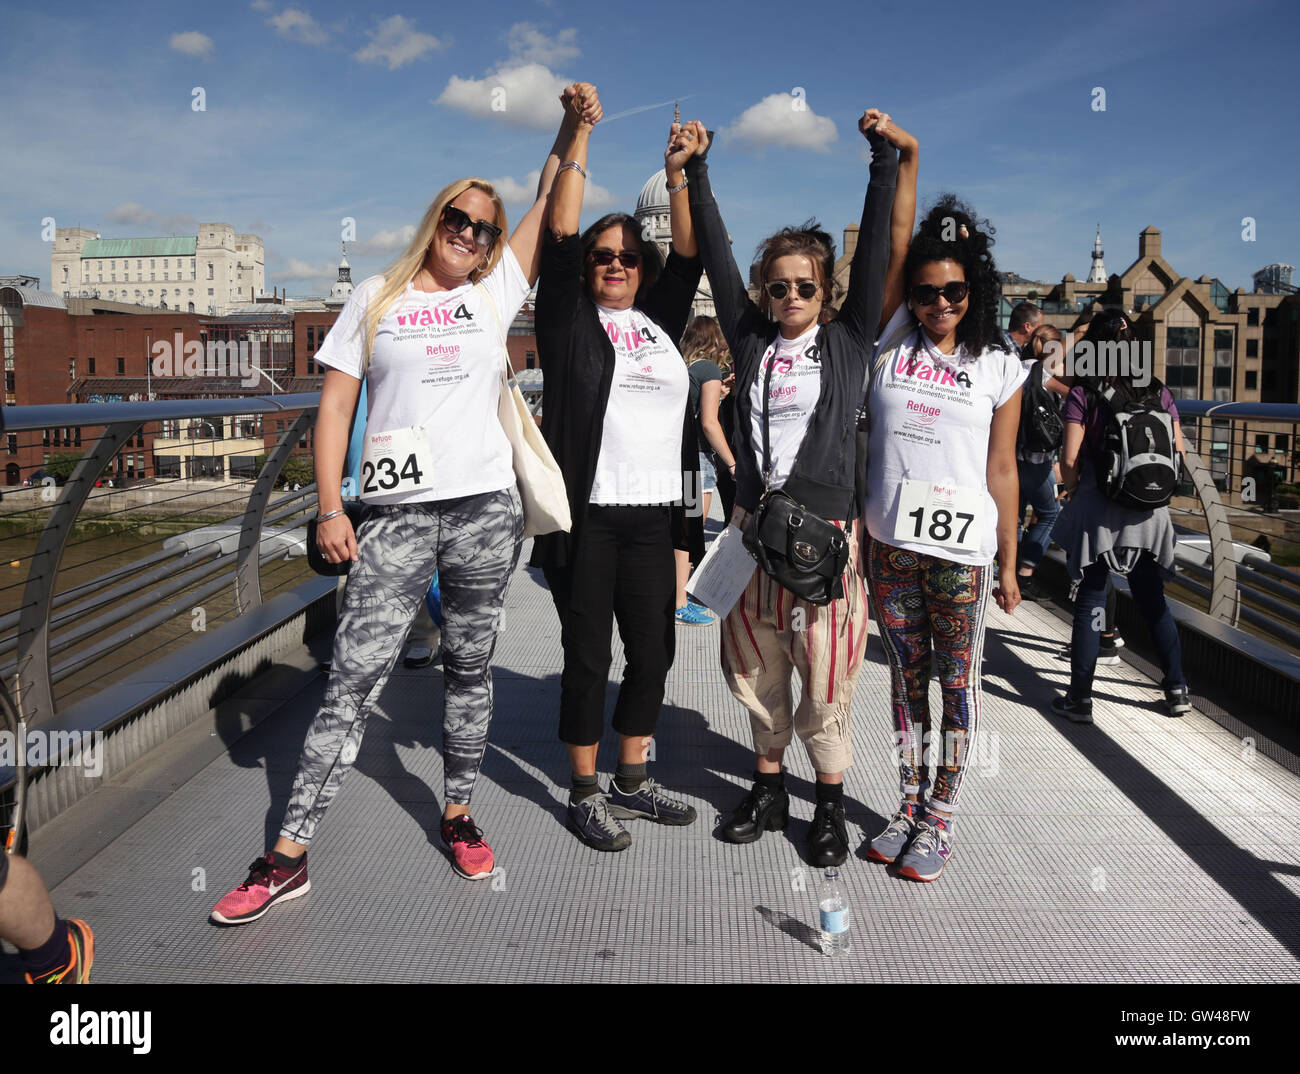 (From the left) Sam Nieman, Sandra Horley, chief executive of Refuge, Helena Bonham Carter and Natasha Cottriall pause for a photograph whilst walking across Millennium Bridge, London, during Refuge's 10km walk to raise funds for the domestic violence charity. Stock Photo